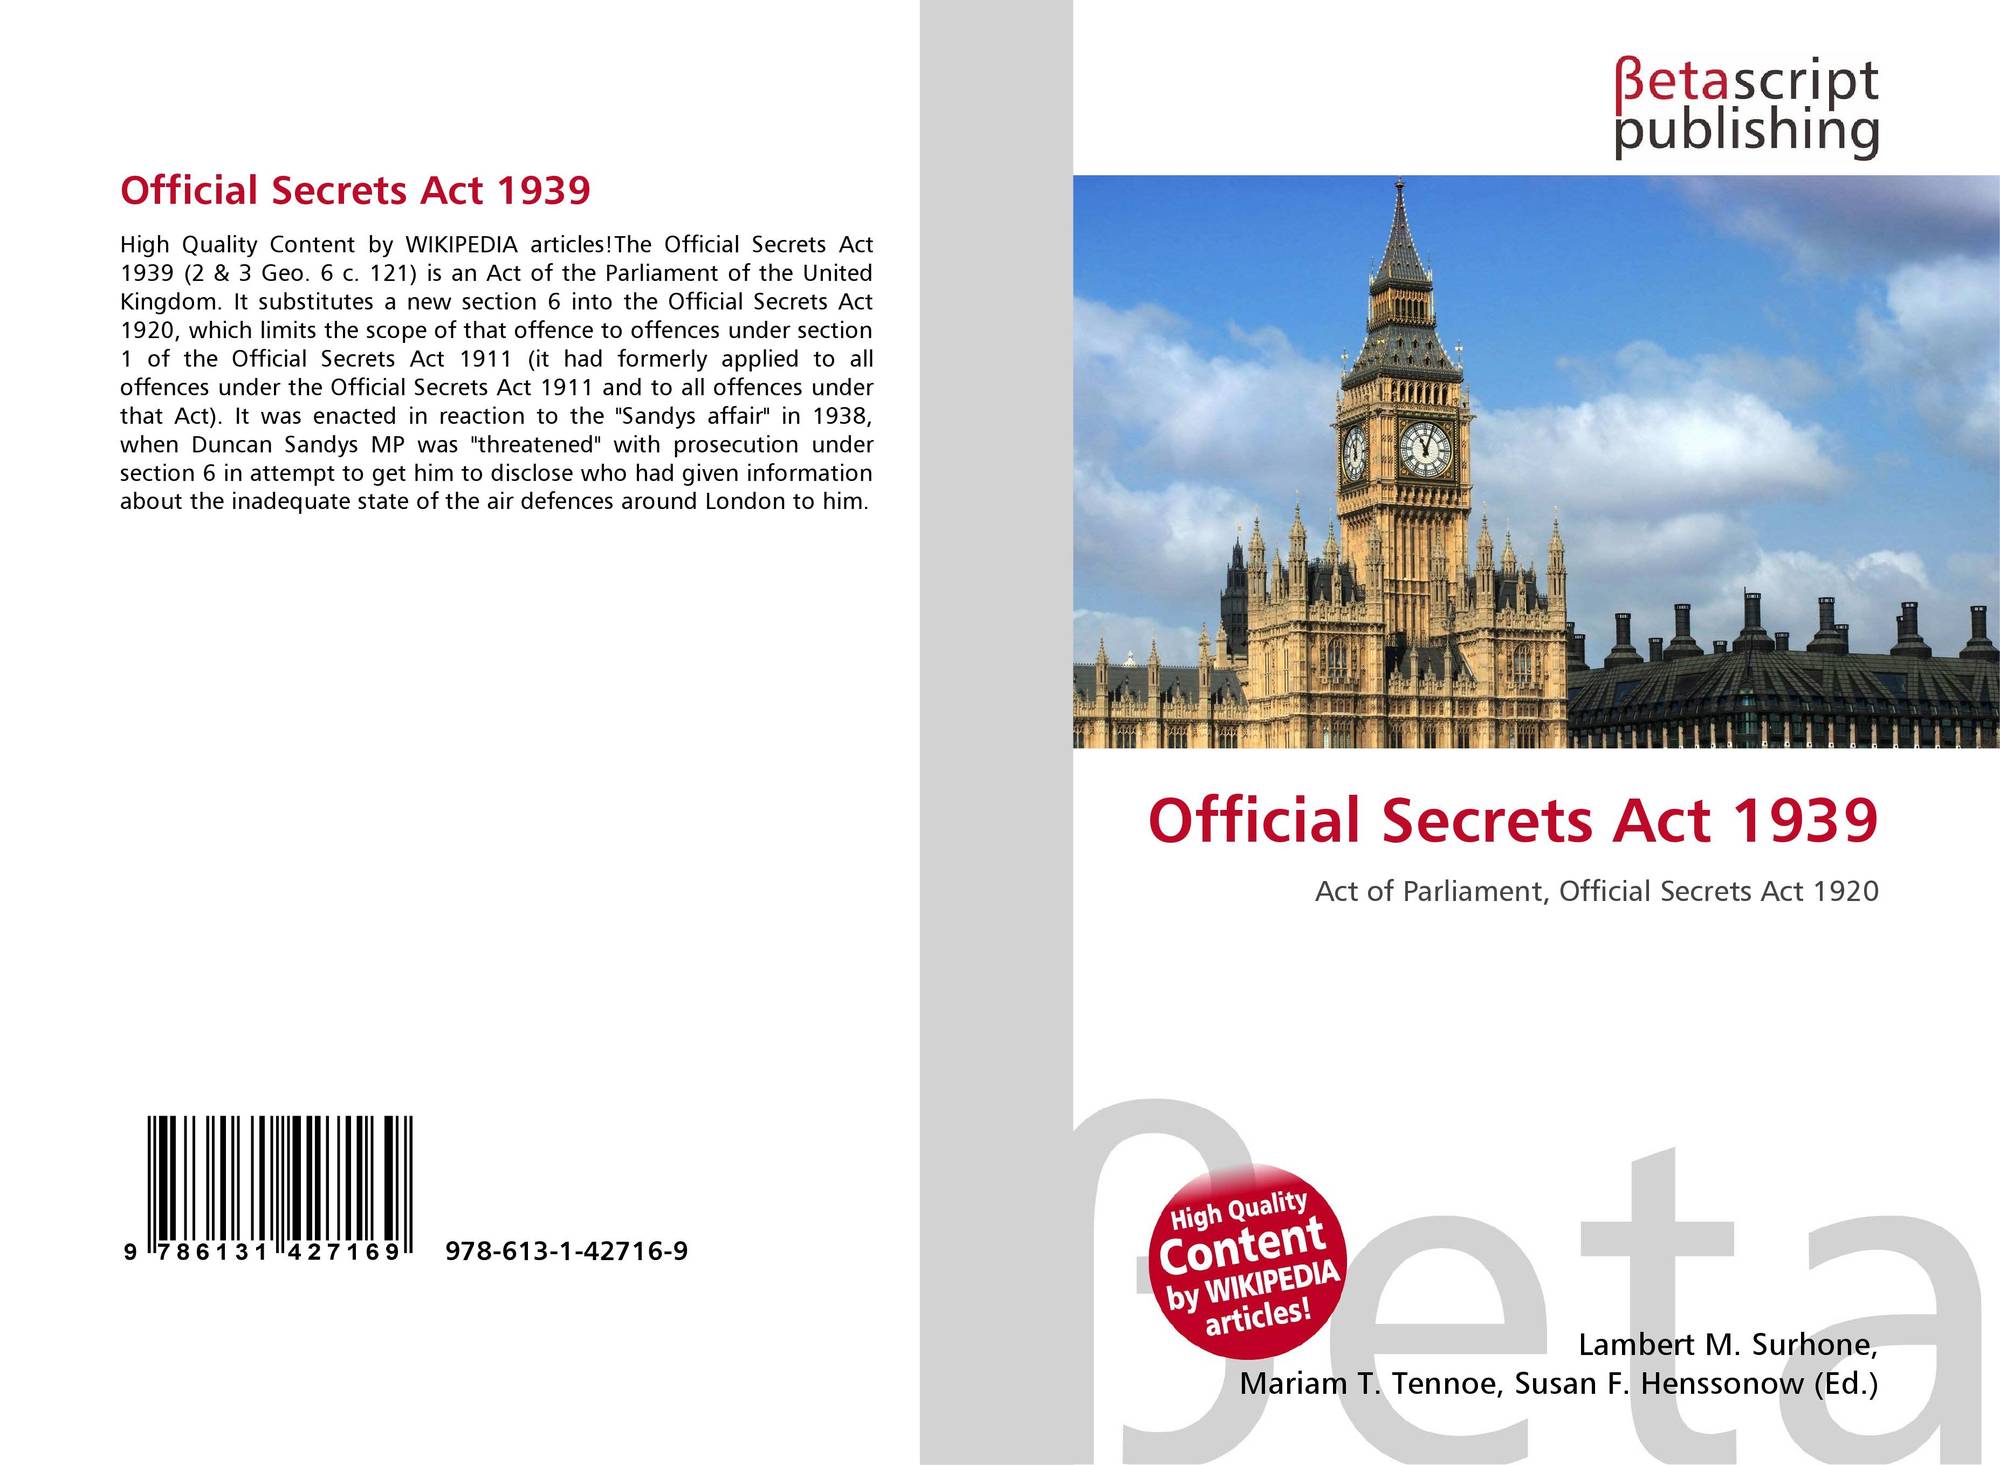 Official Secret Act 1972 : Myanmar prosecutor seeks Official Secrets Act charges ... / The most lyrically erudite band ive heard in some official secrets act 1972.